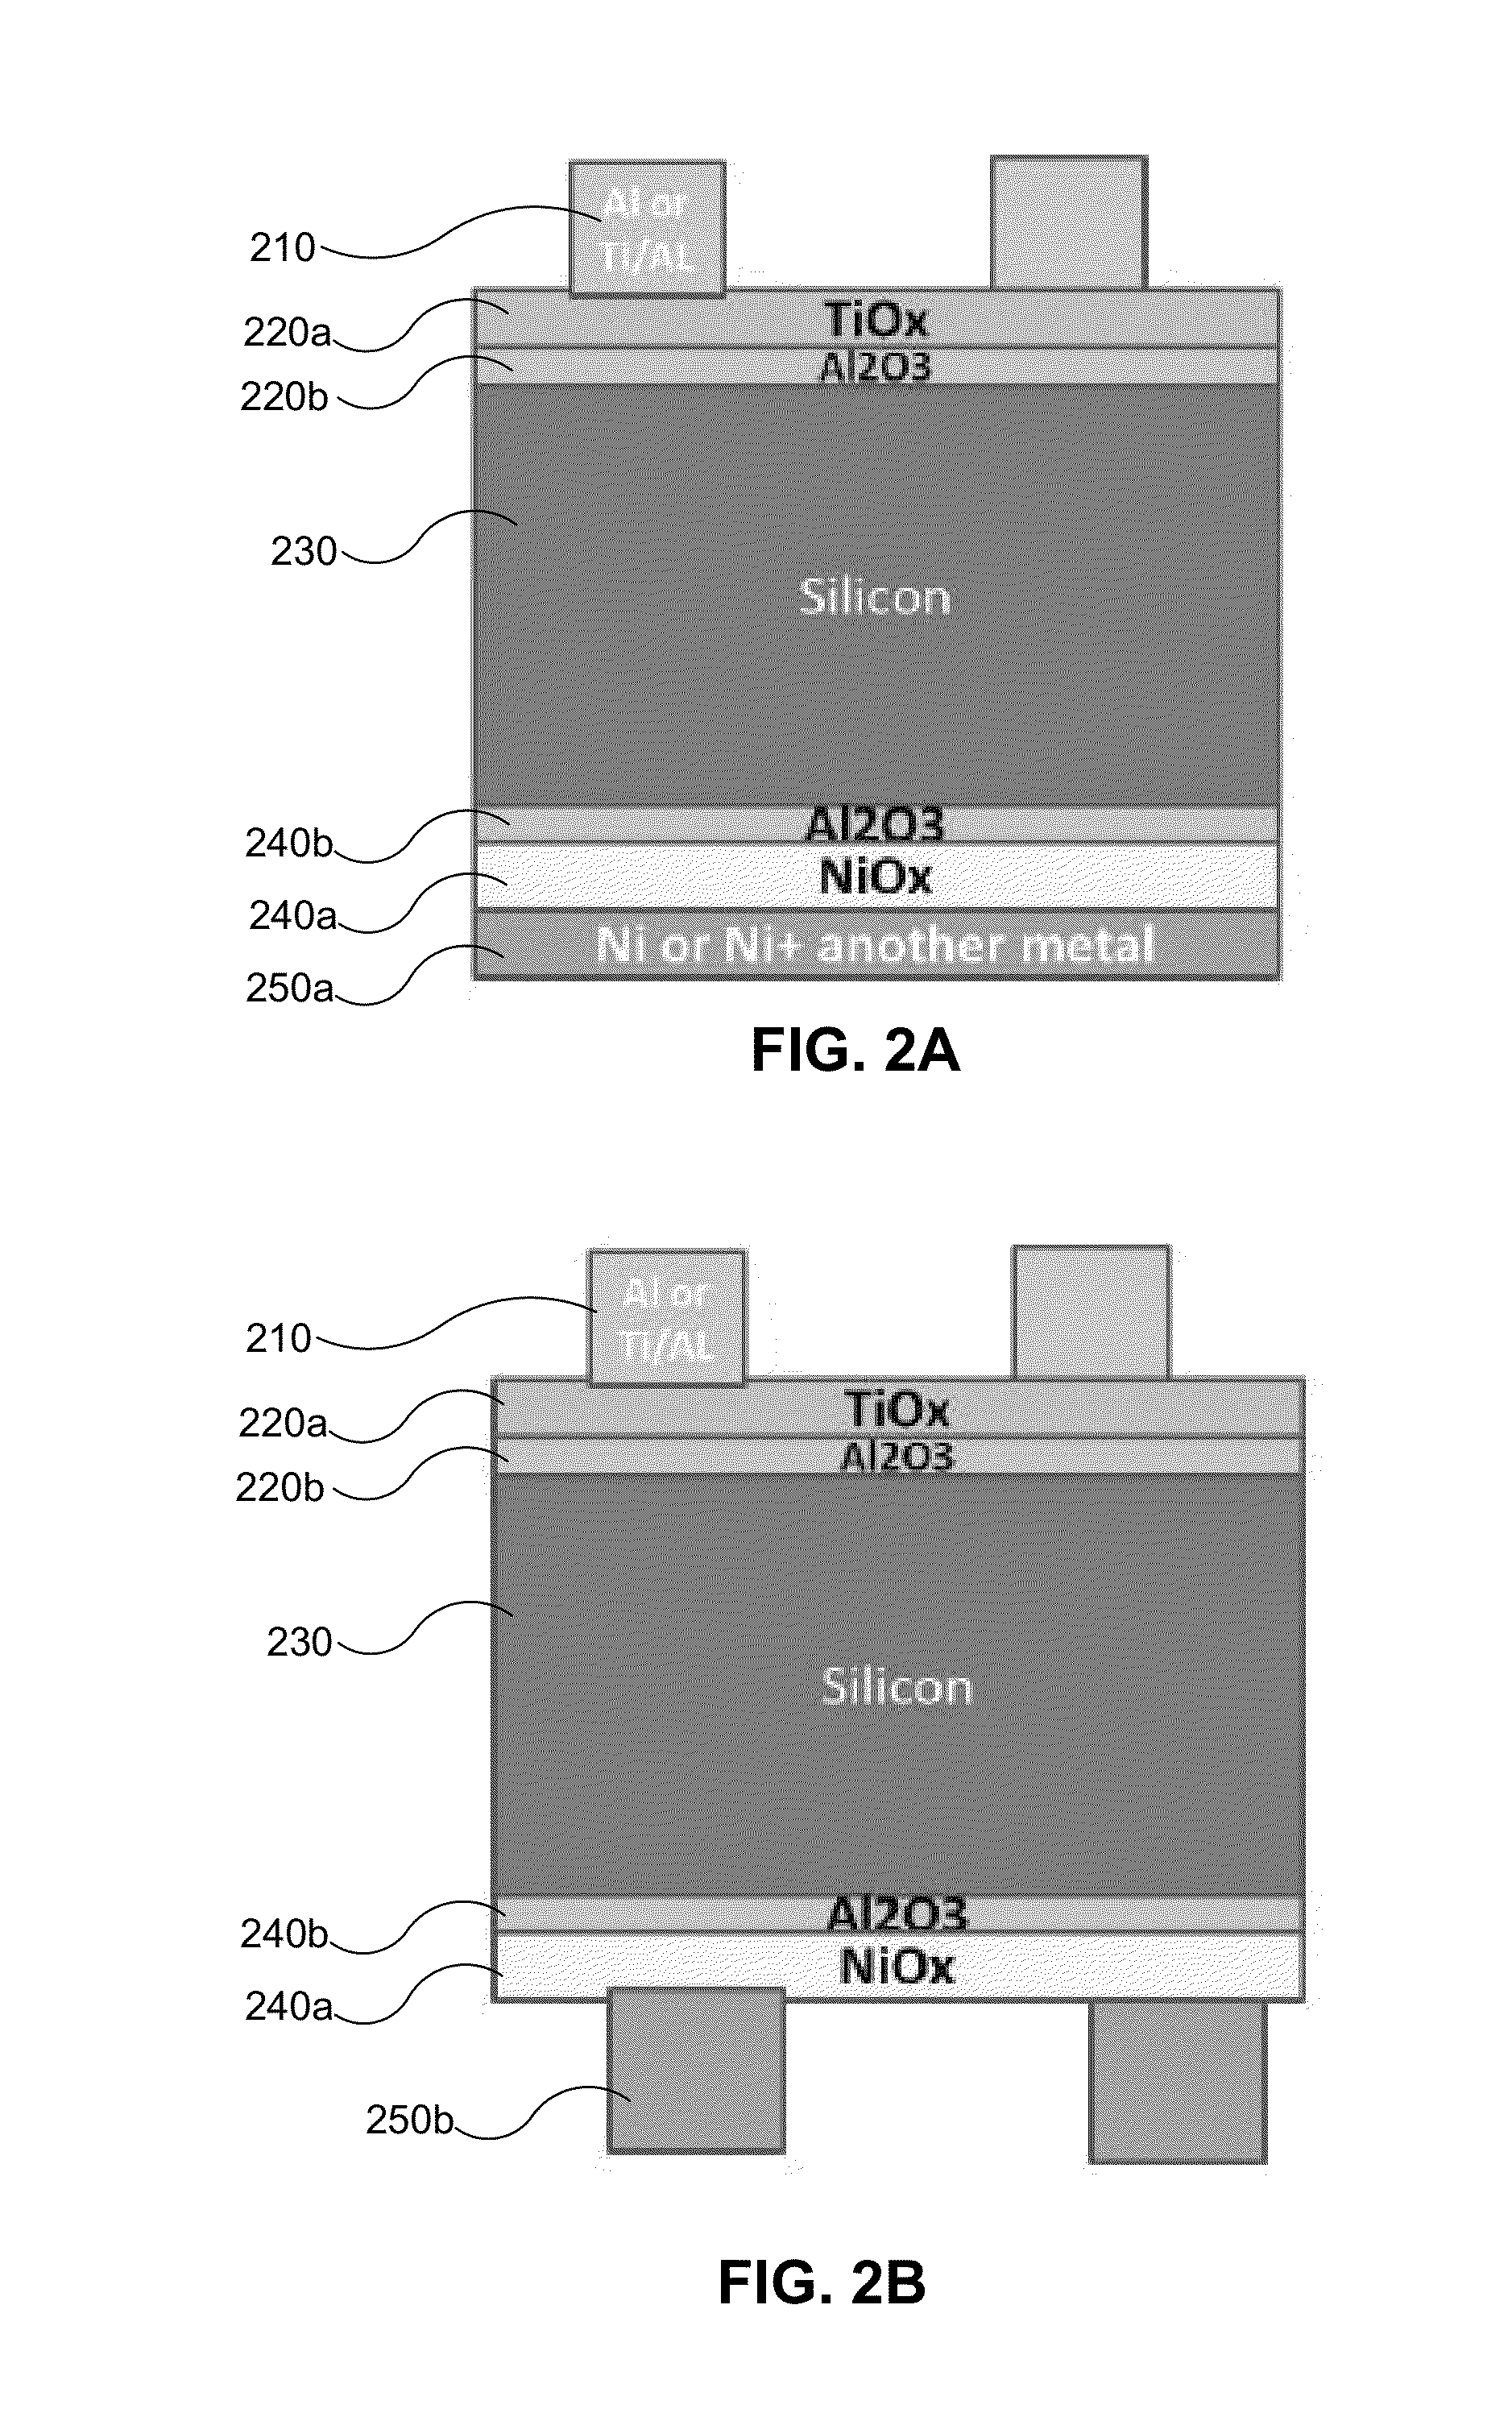 Dielectric-passivated metal insulator photovoltaic solar cells